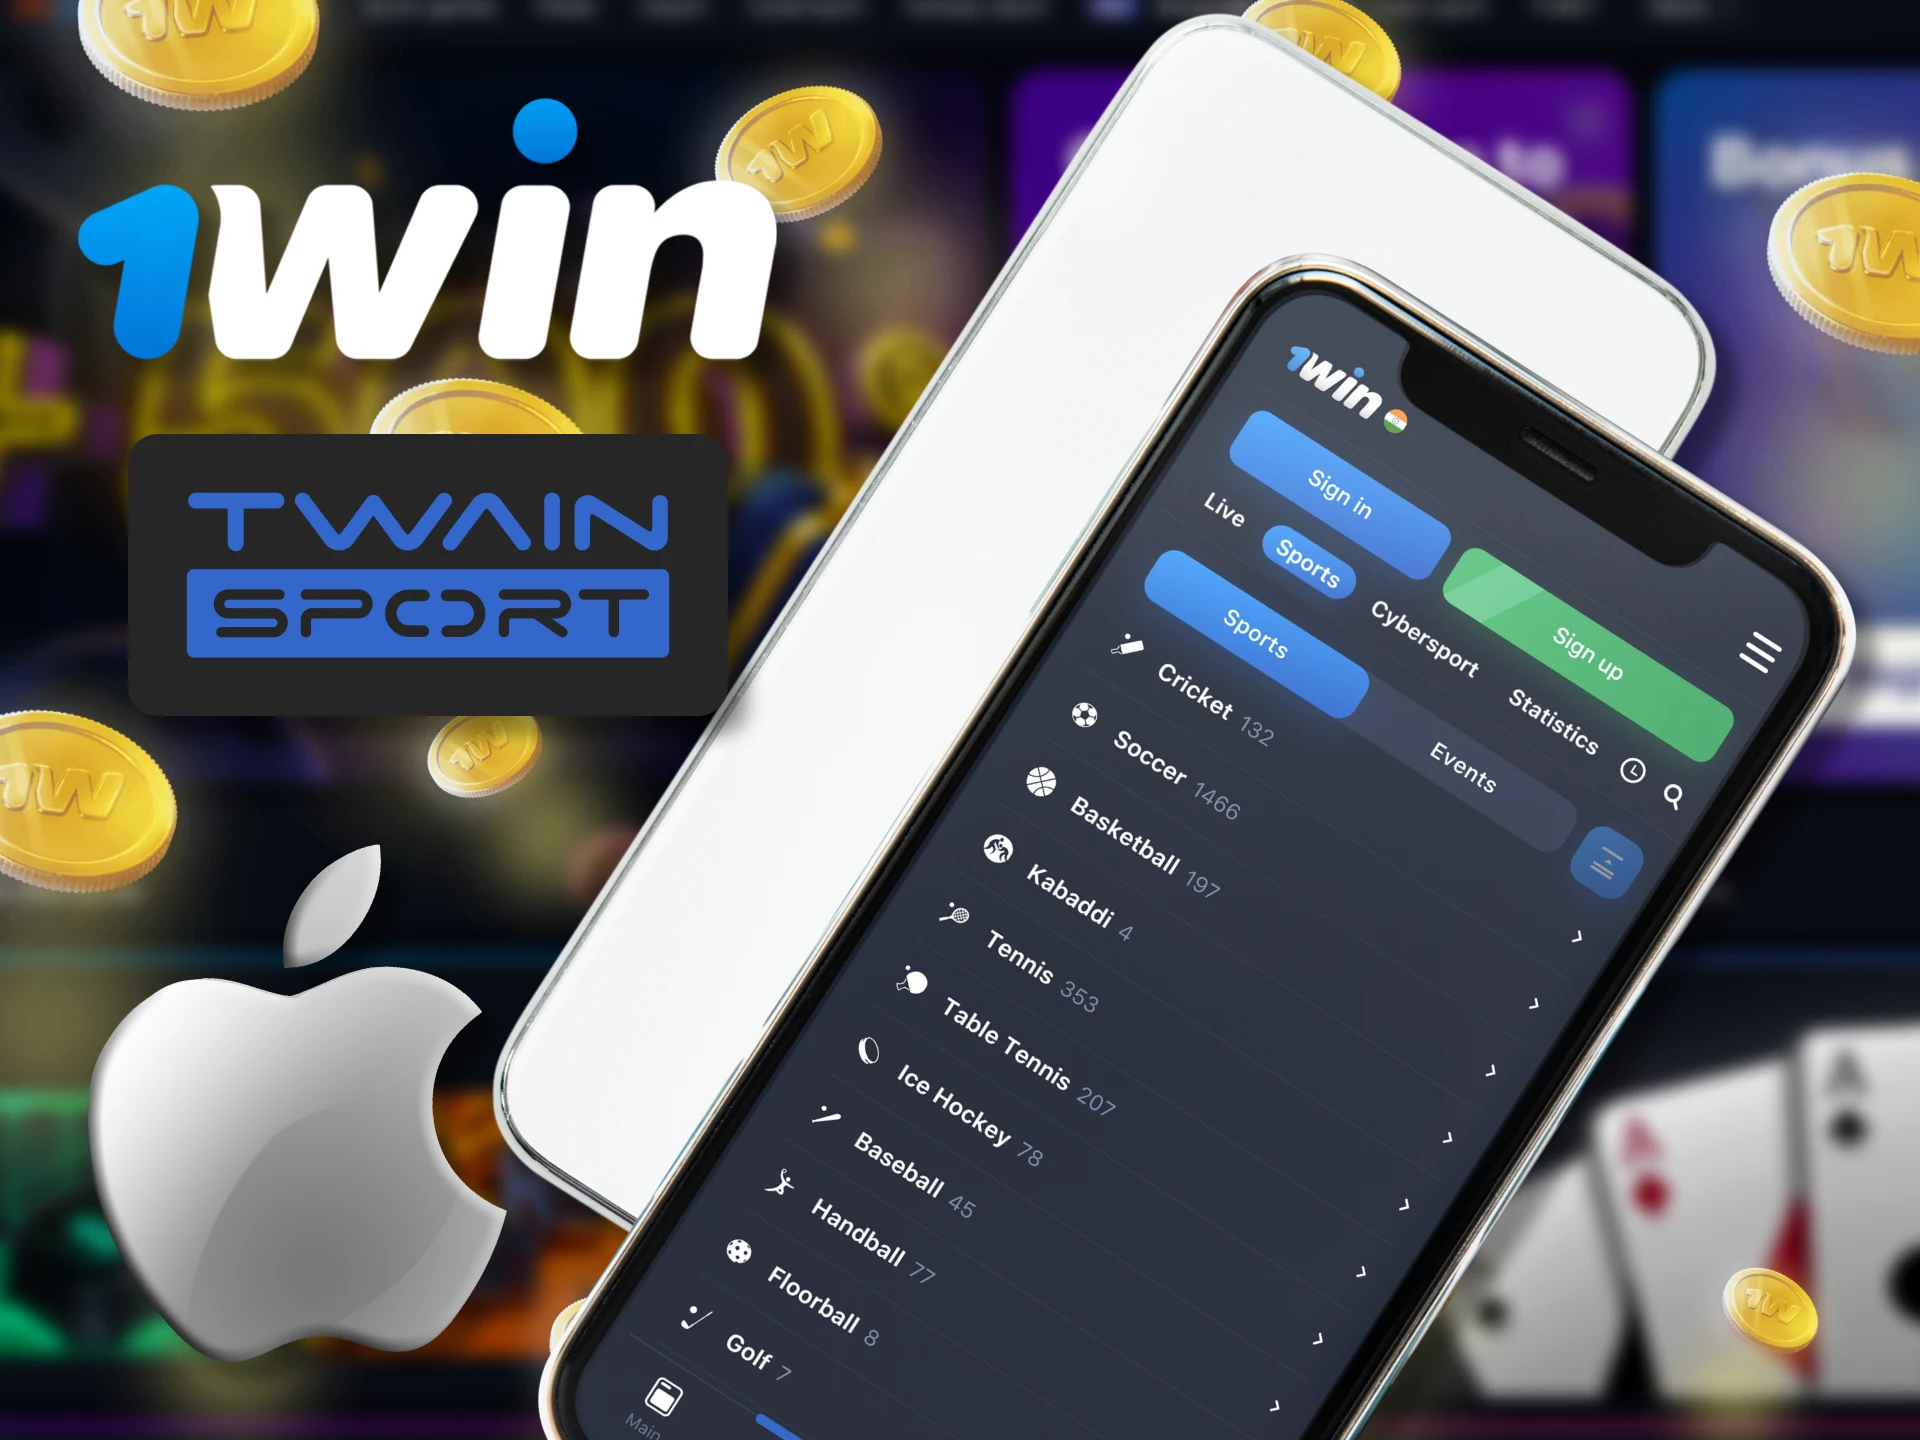 At 1Win, bet on Twain Sport right on your iOS phone.